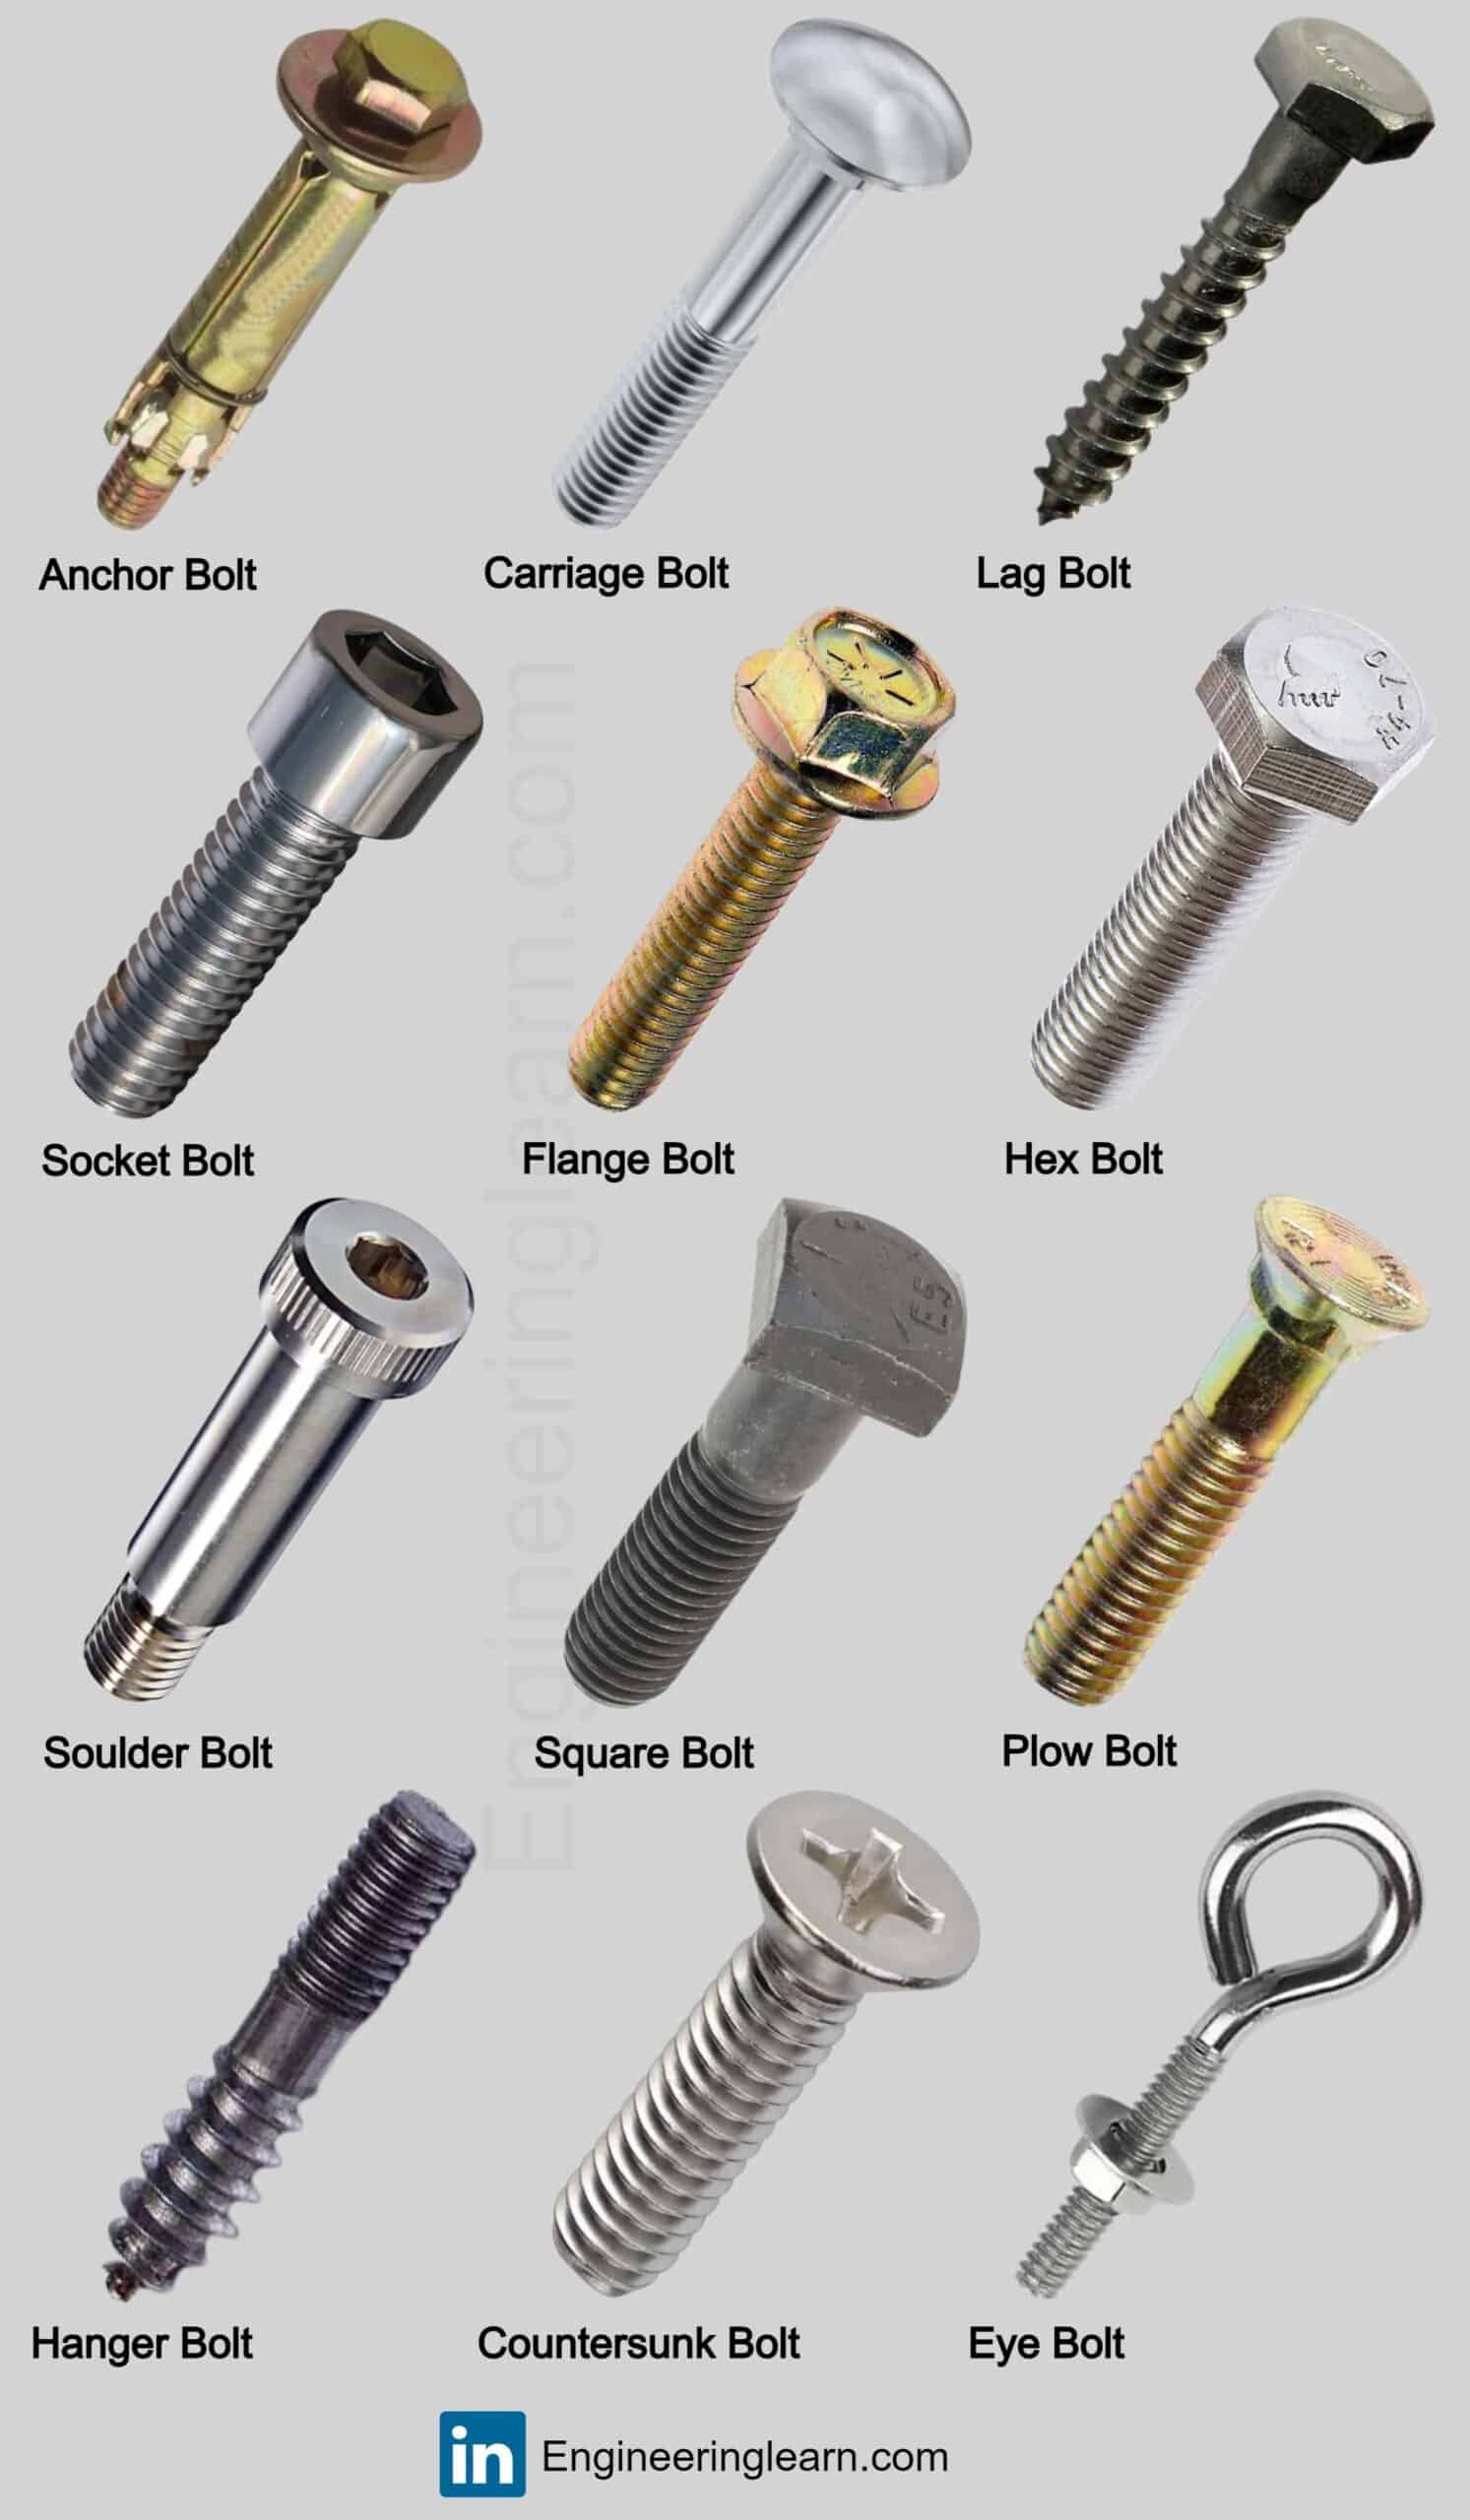 8 Types of Bolts and Their Uses [with Pictures & Names] - Engineering Learn